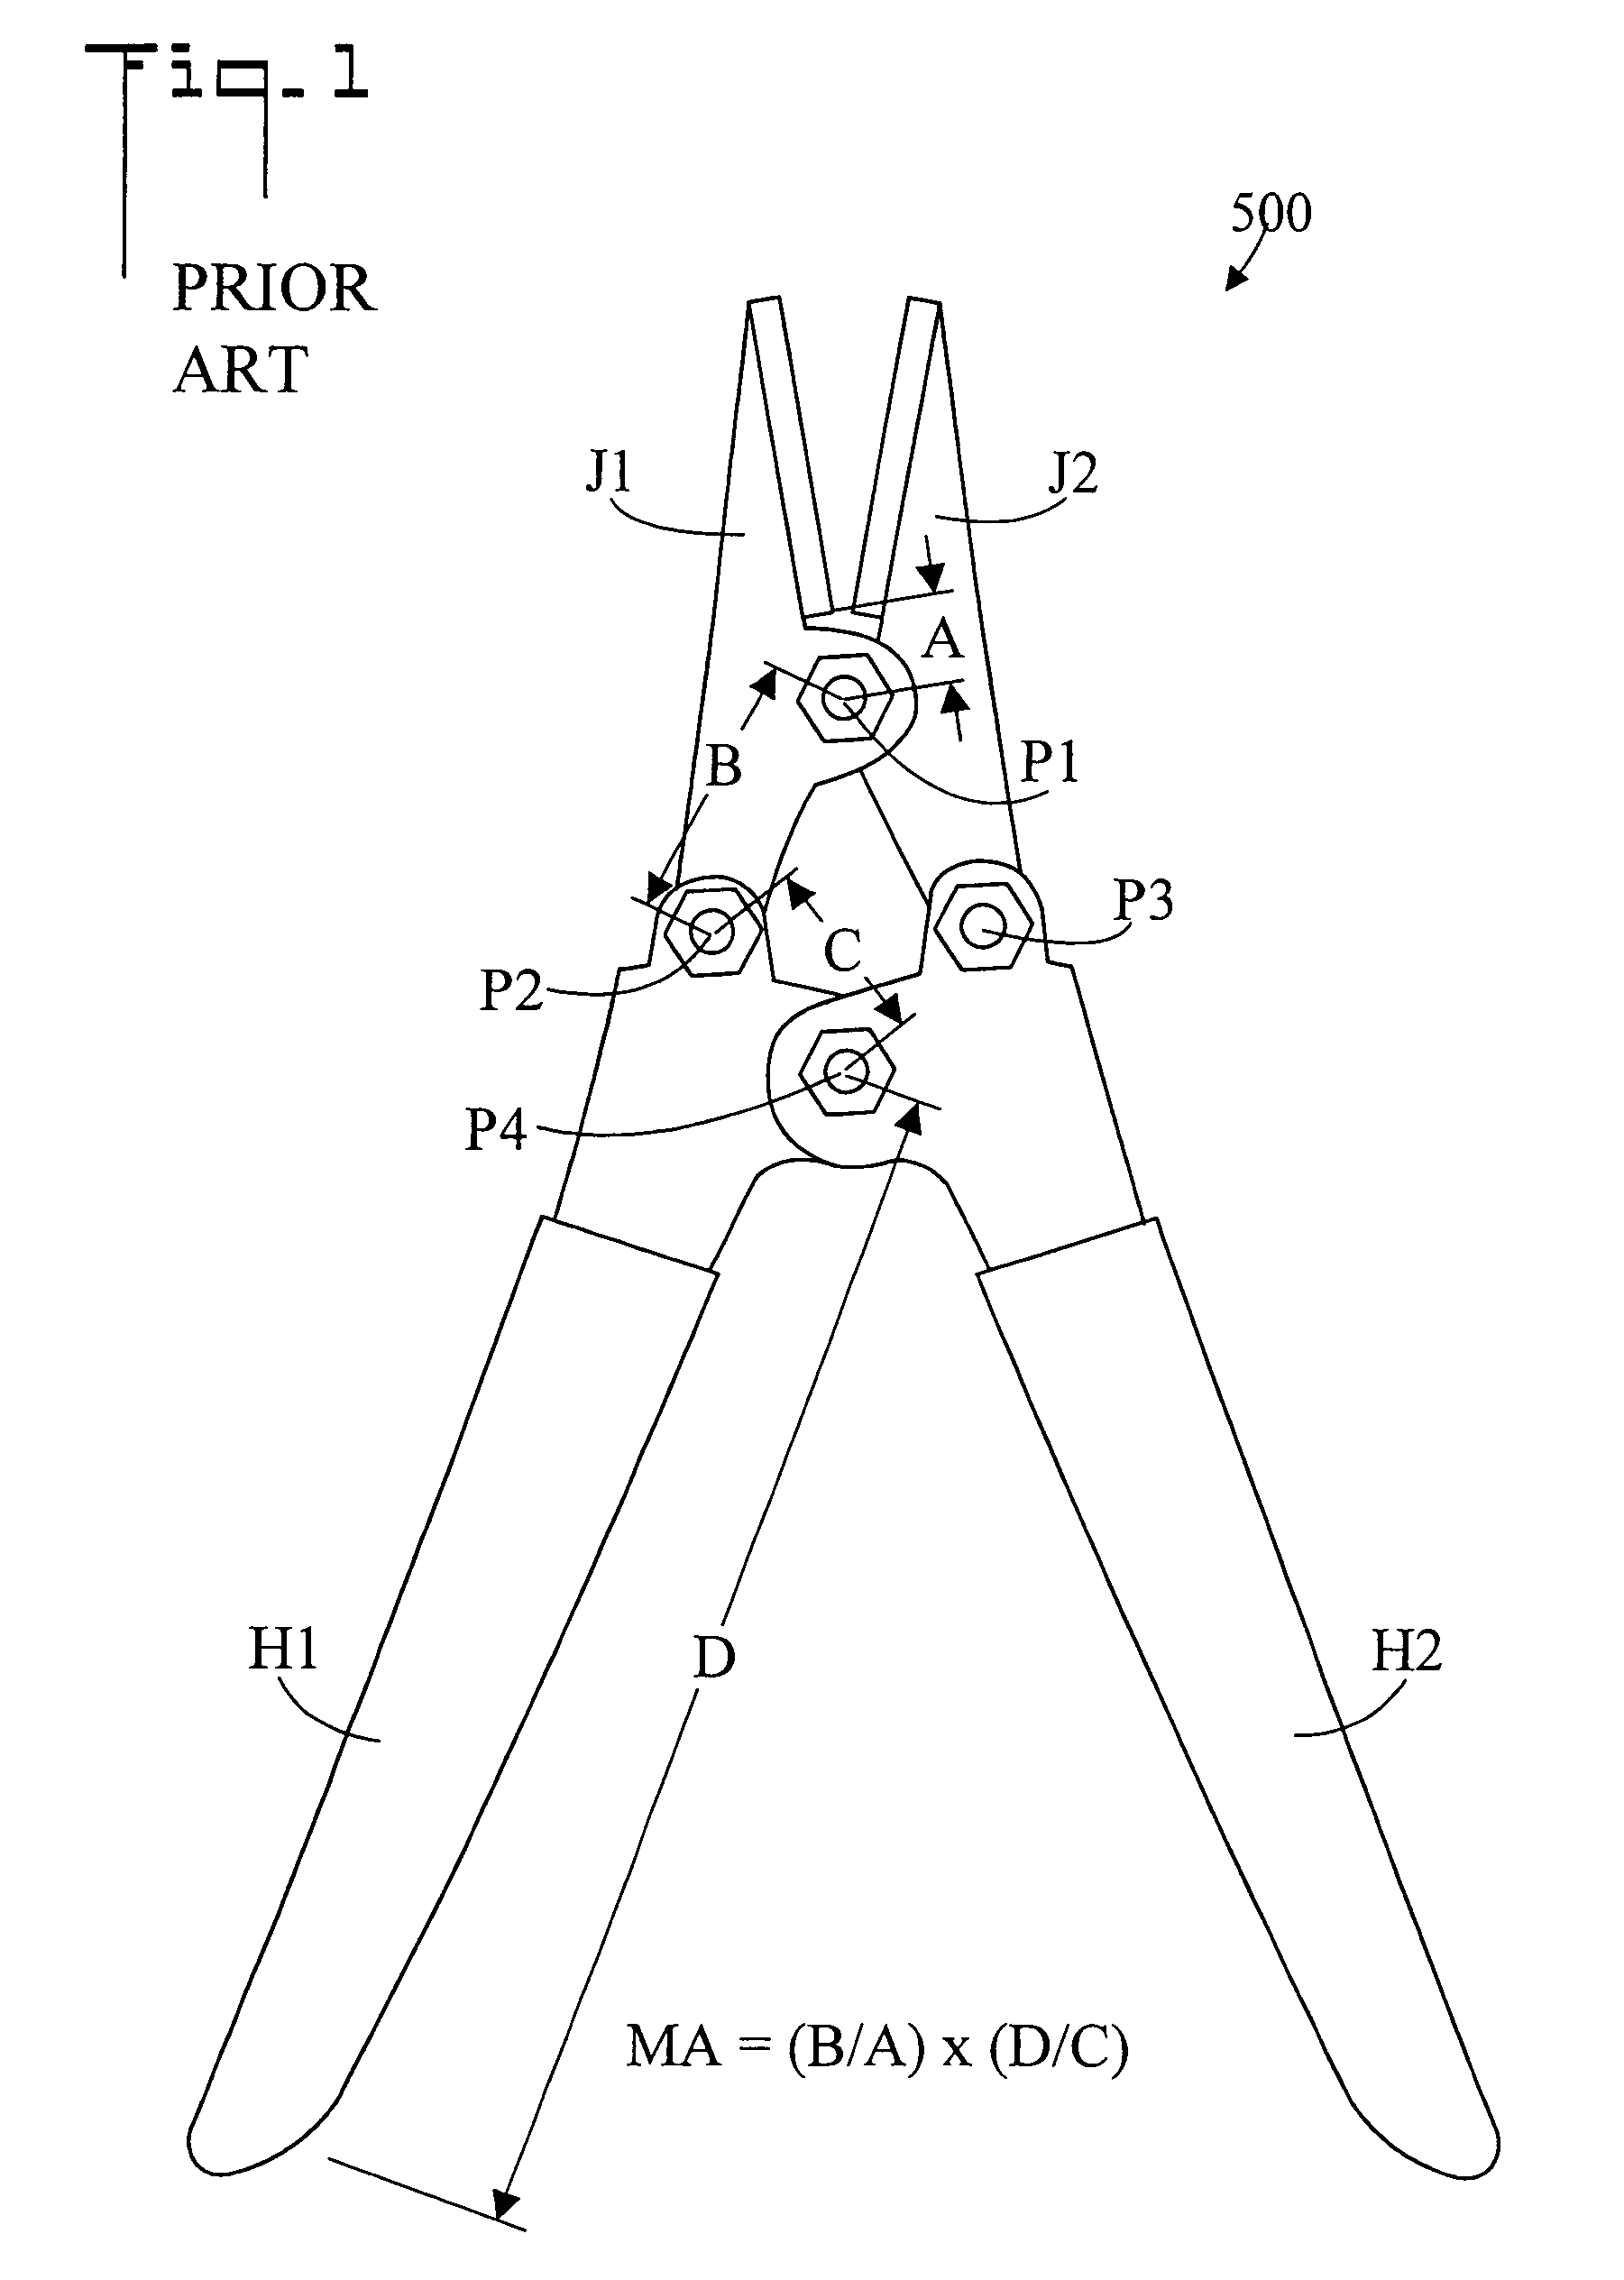 Hand tool providing double compound leverage to the jaws